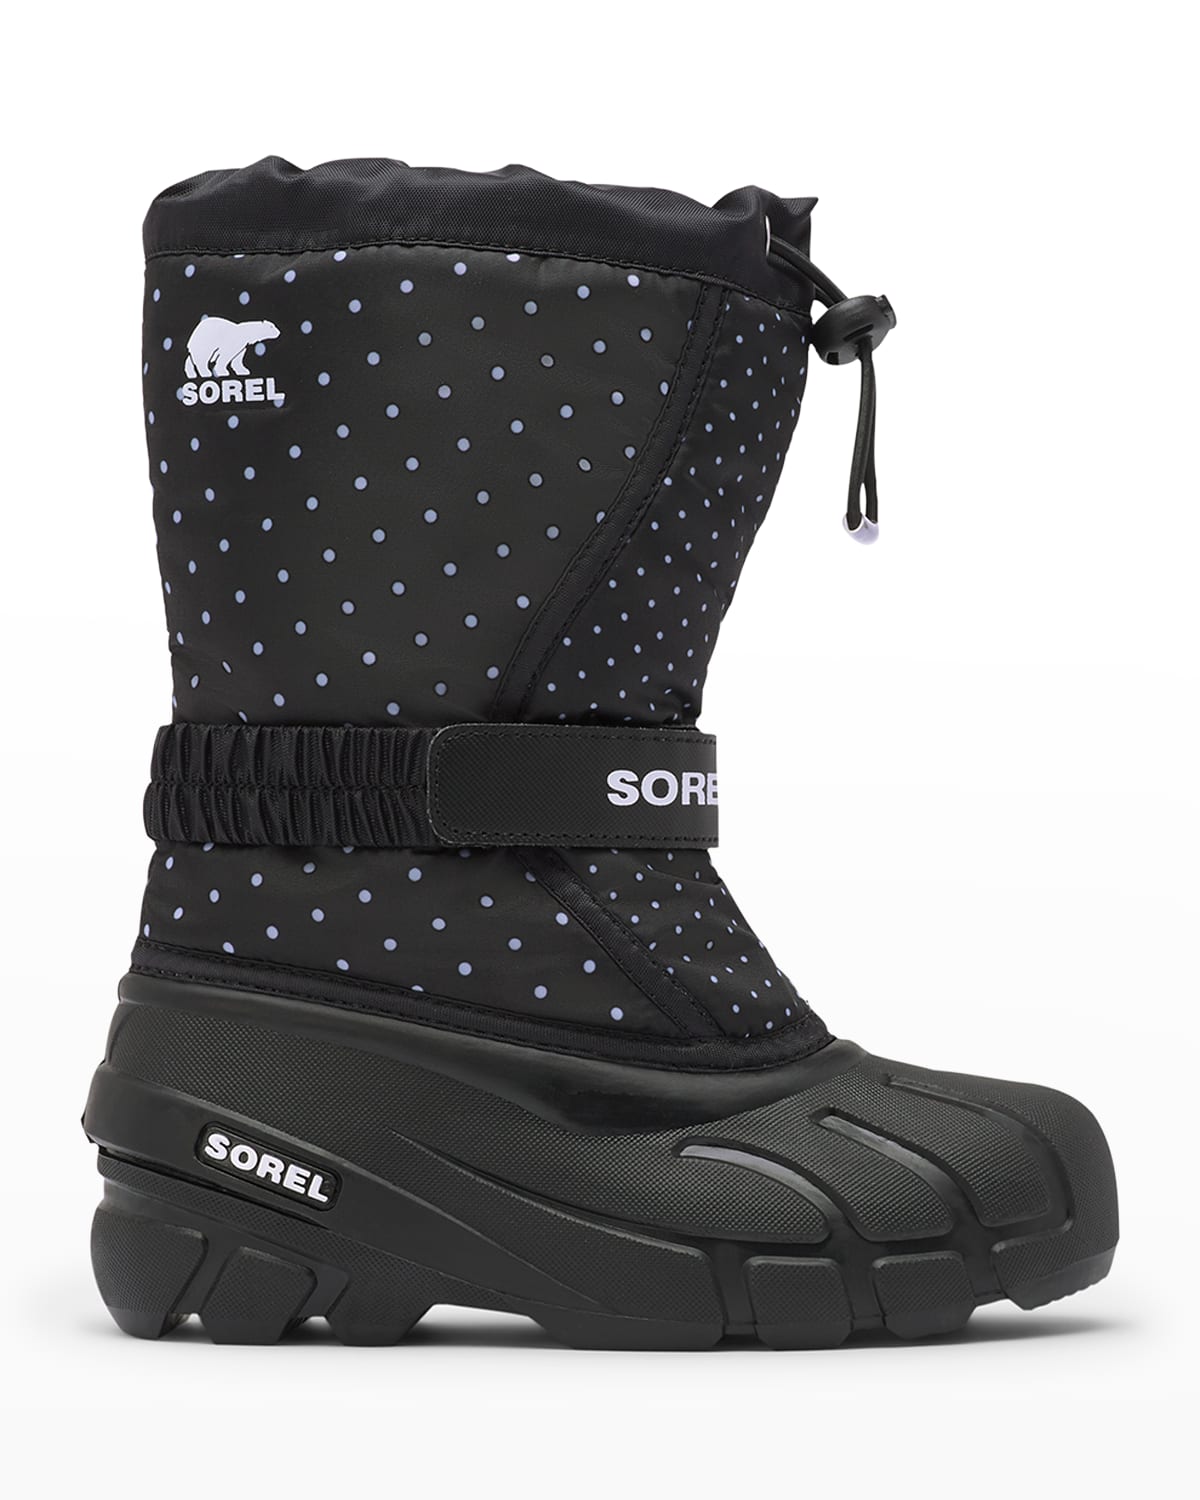 Sorel Girl's Flurry Padded Drawstring Weather Boots, Toddlers/kids